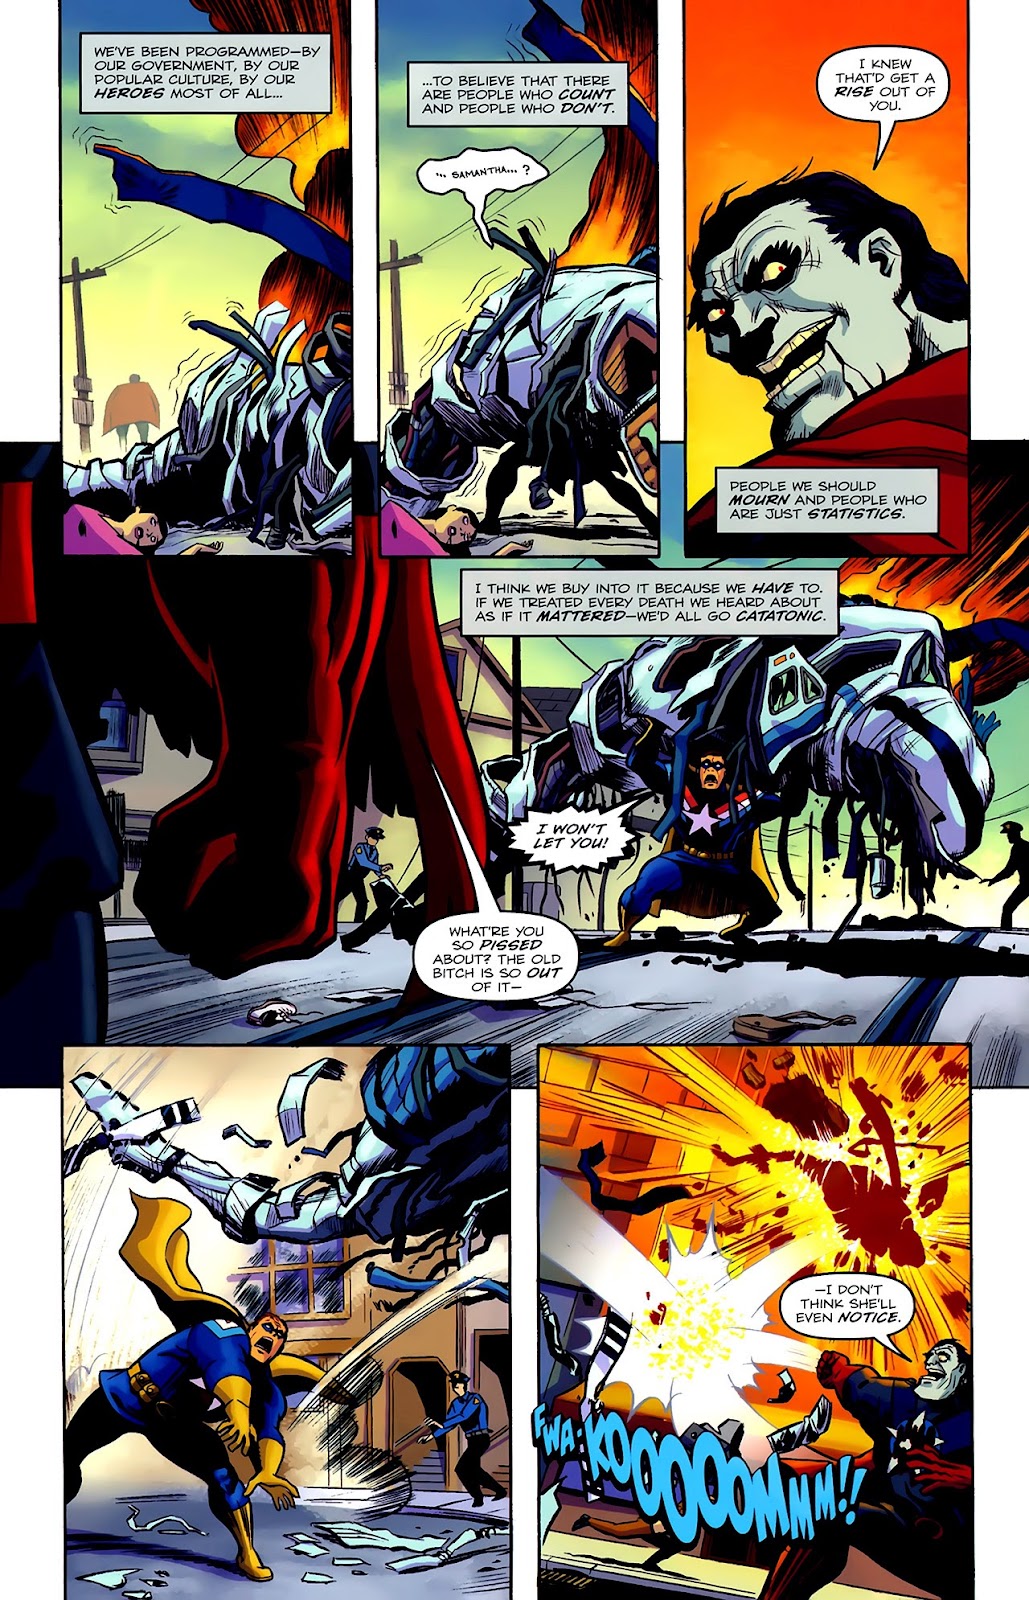 The Life and Times of Savior 28 issue 1 - Page 4